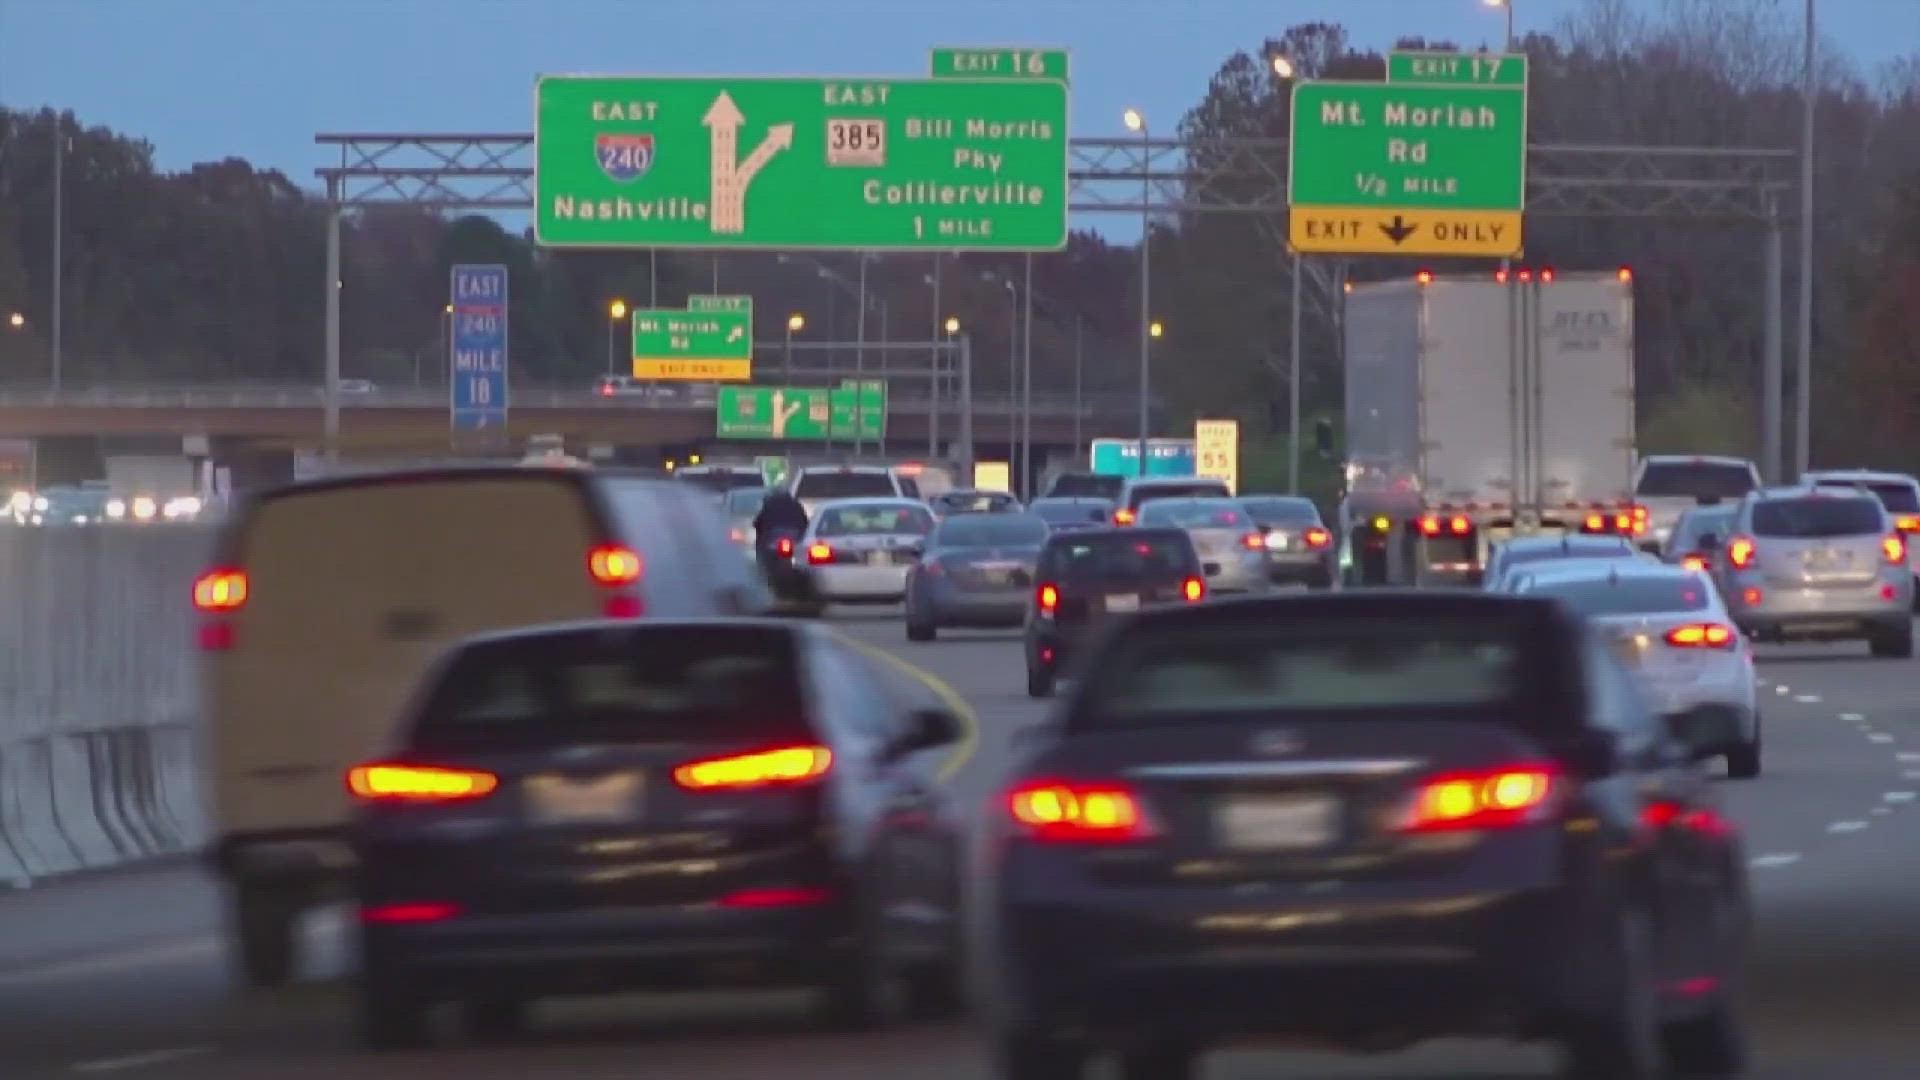 The plan includes new lanes for drivers who want to pay to avoid traffic.